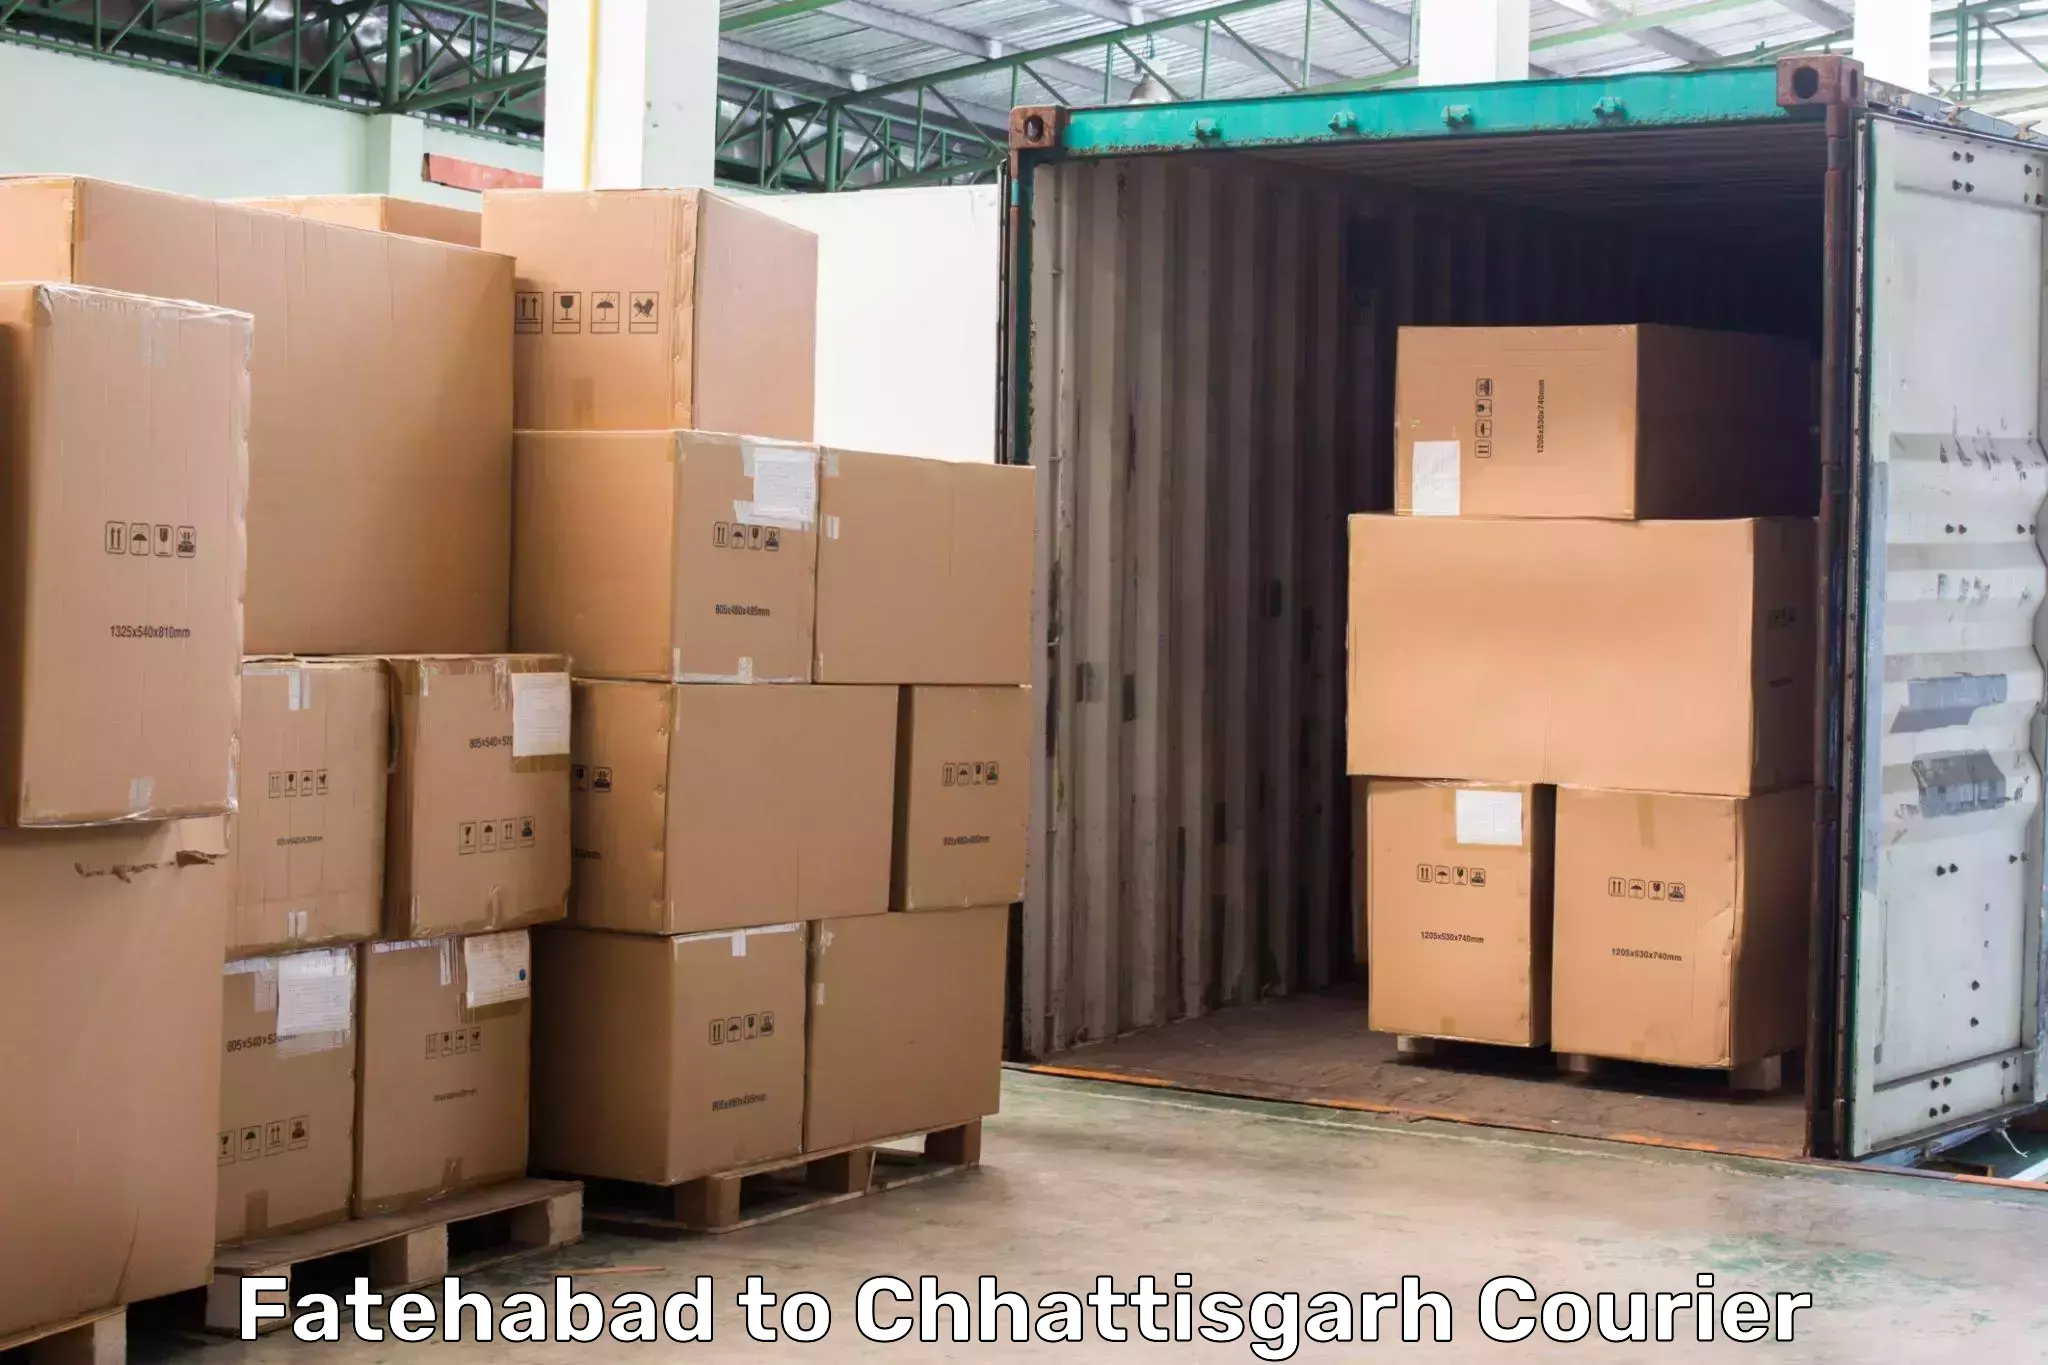 High-speed parcel service Fatehabad to Raigarh